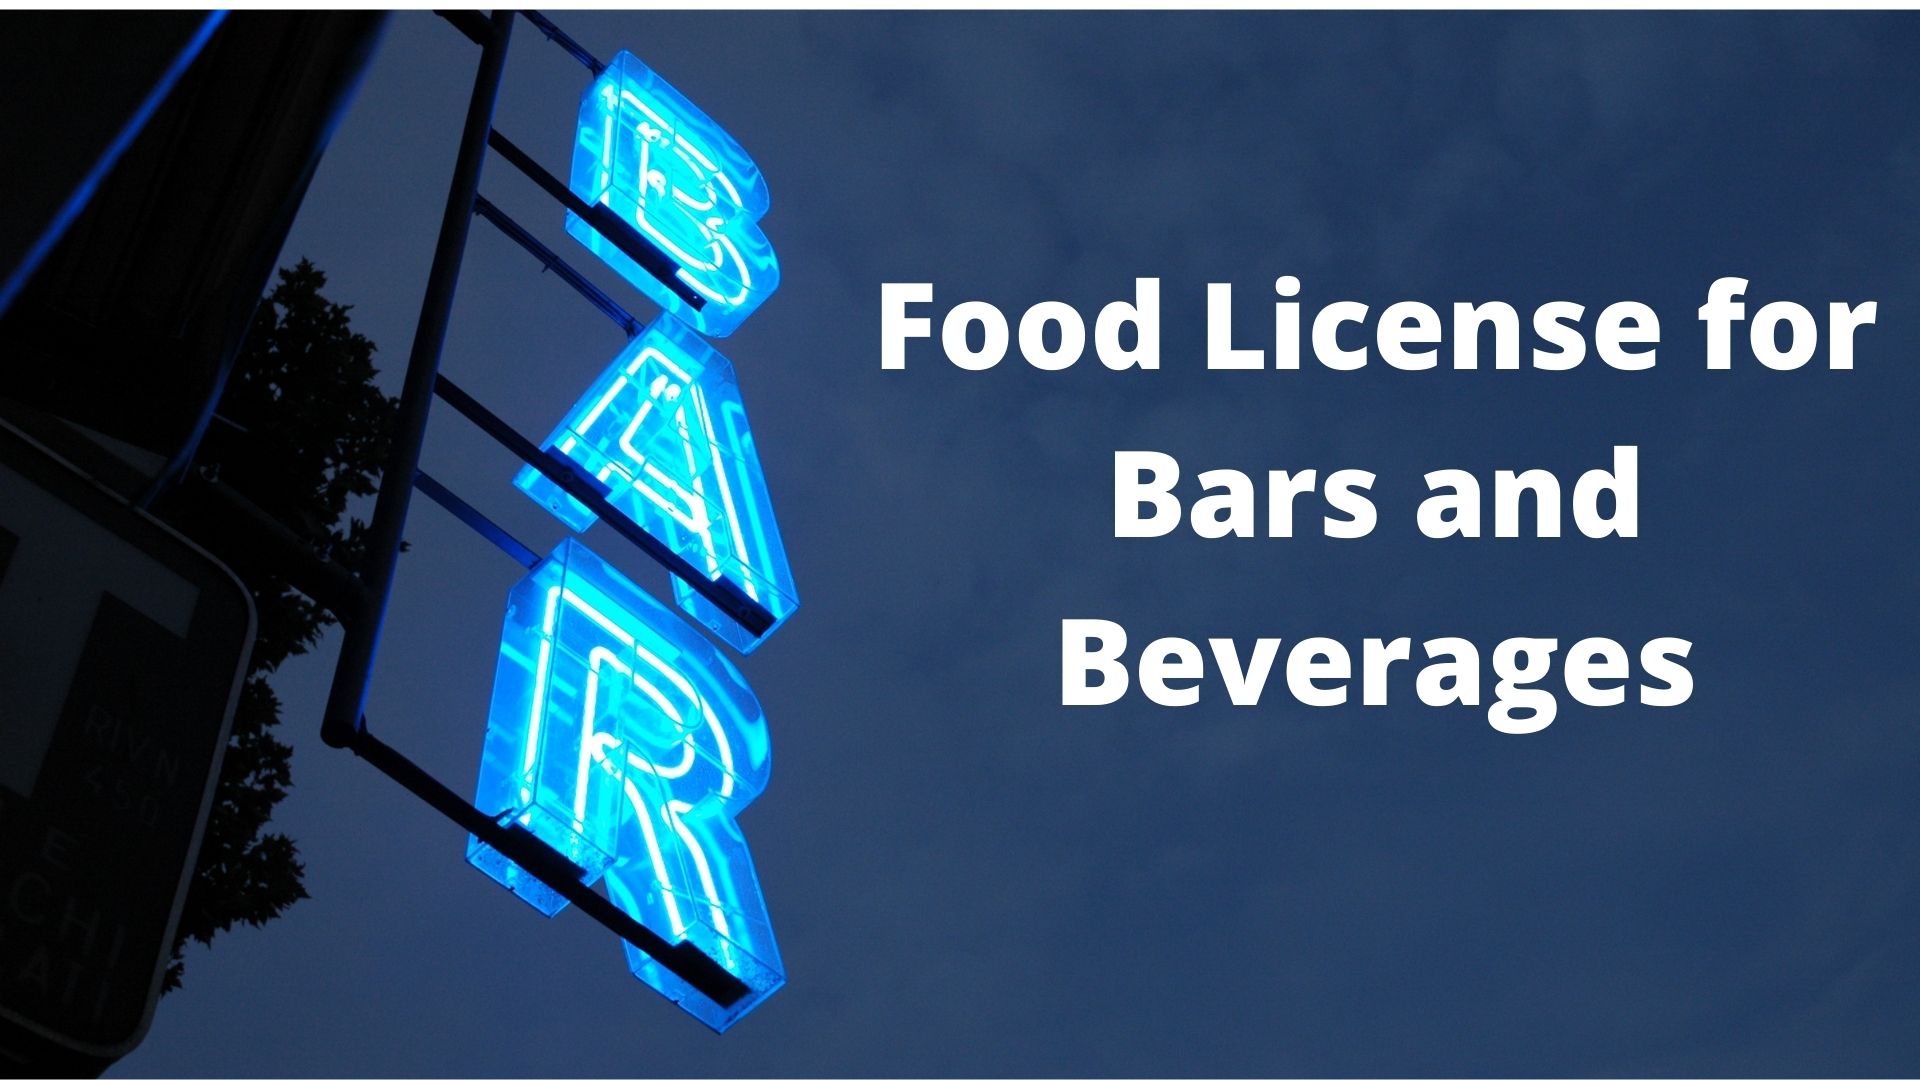 Food License for Bars and Beverages